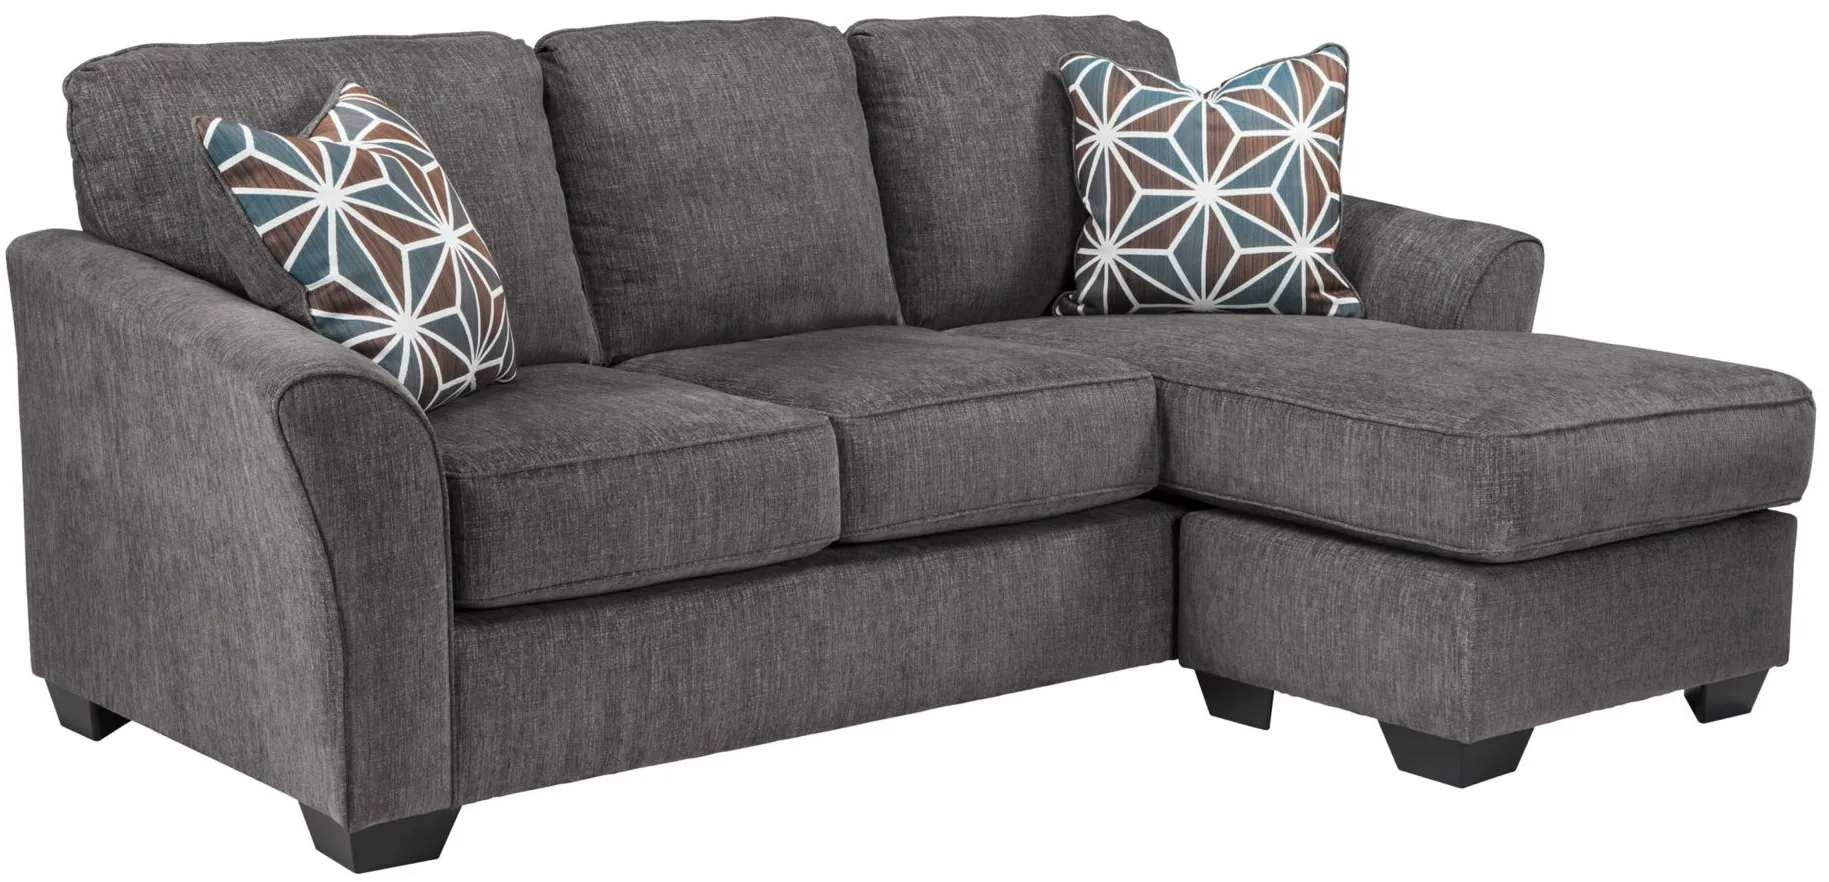 Southport 2-pc. Right Arm Facing Sectional Queen Sleeper Sofa in Slate by Ashley Furniture